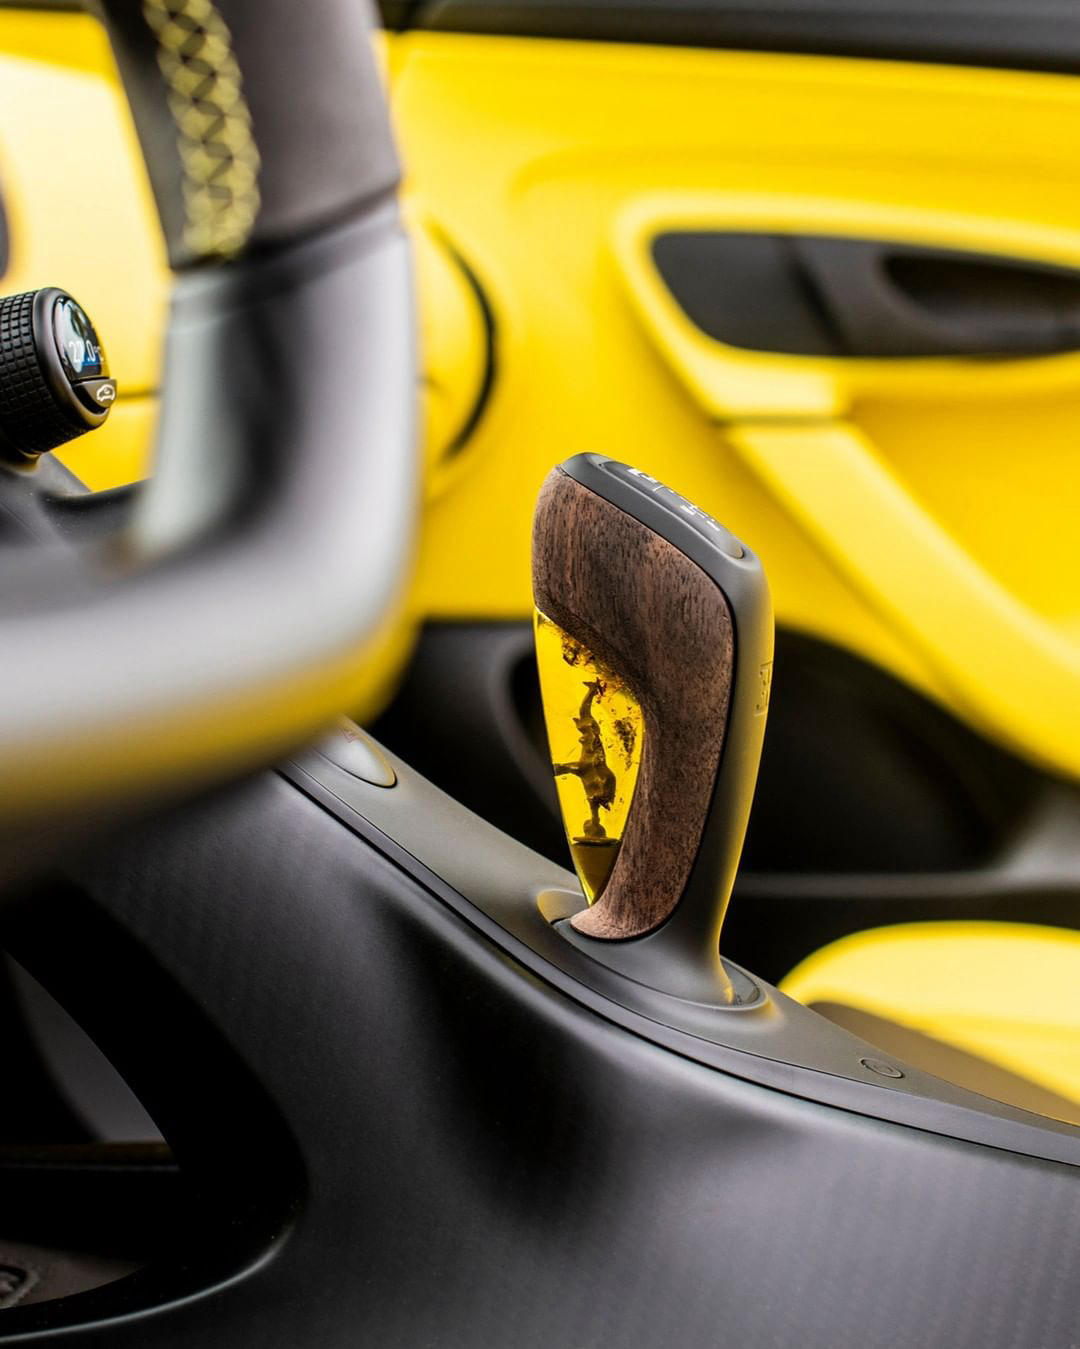 BUGATTI - Black and yellow is a duo-tone finish that can be traced throughout BUGATTI’s history